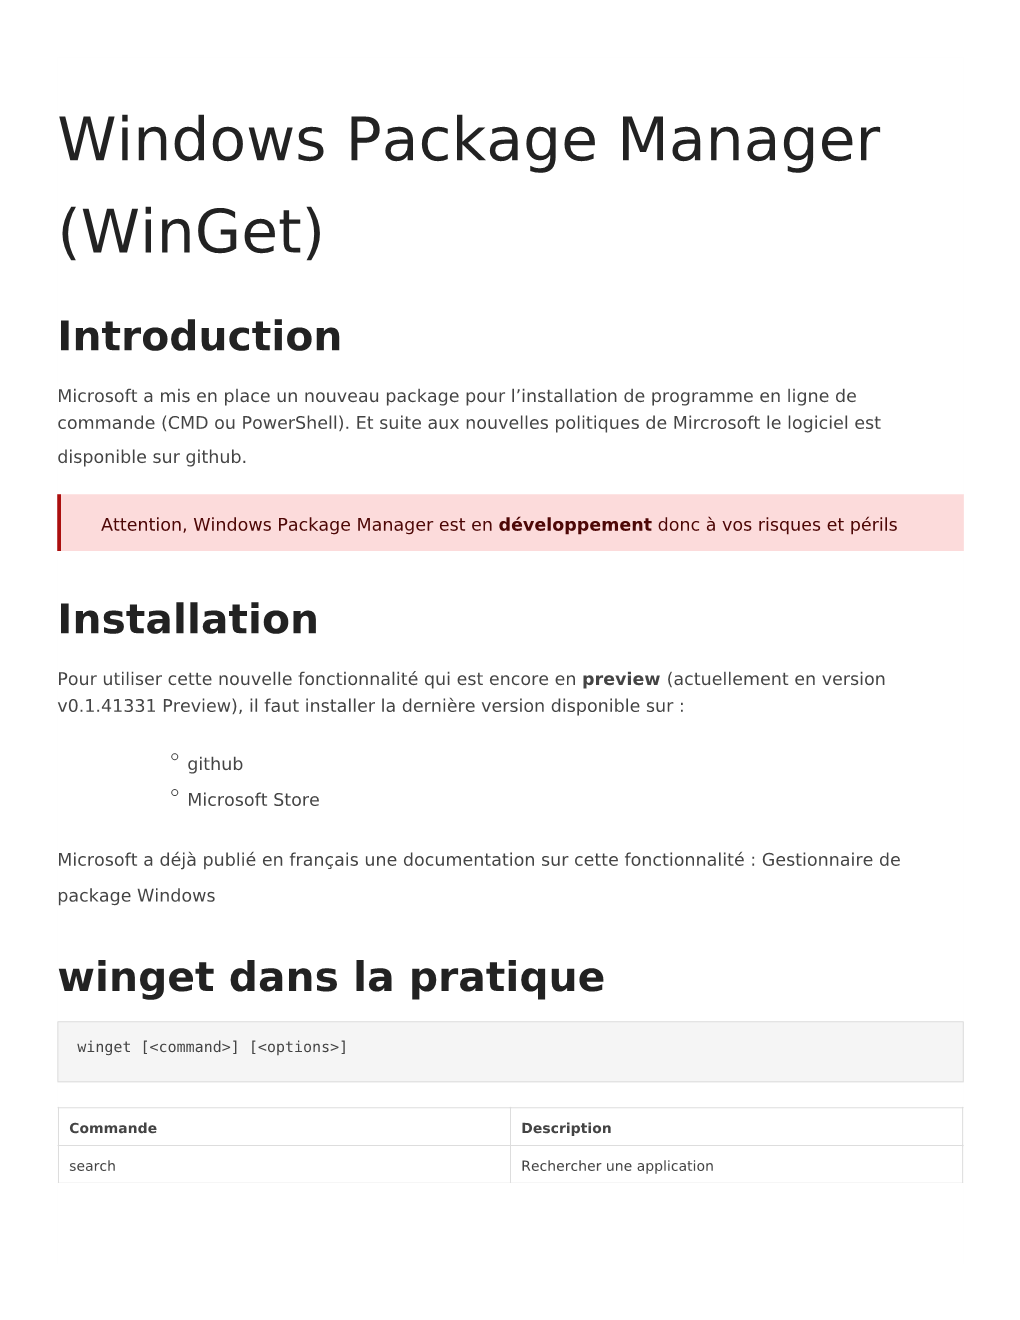 Windows Package Manager (Winget)